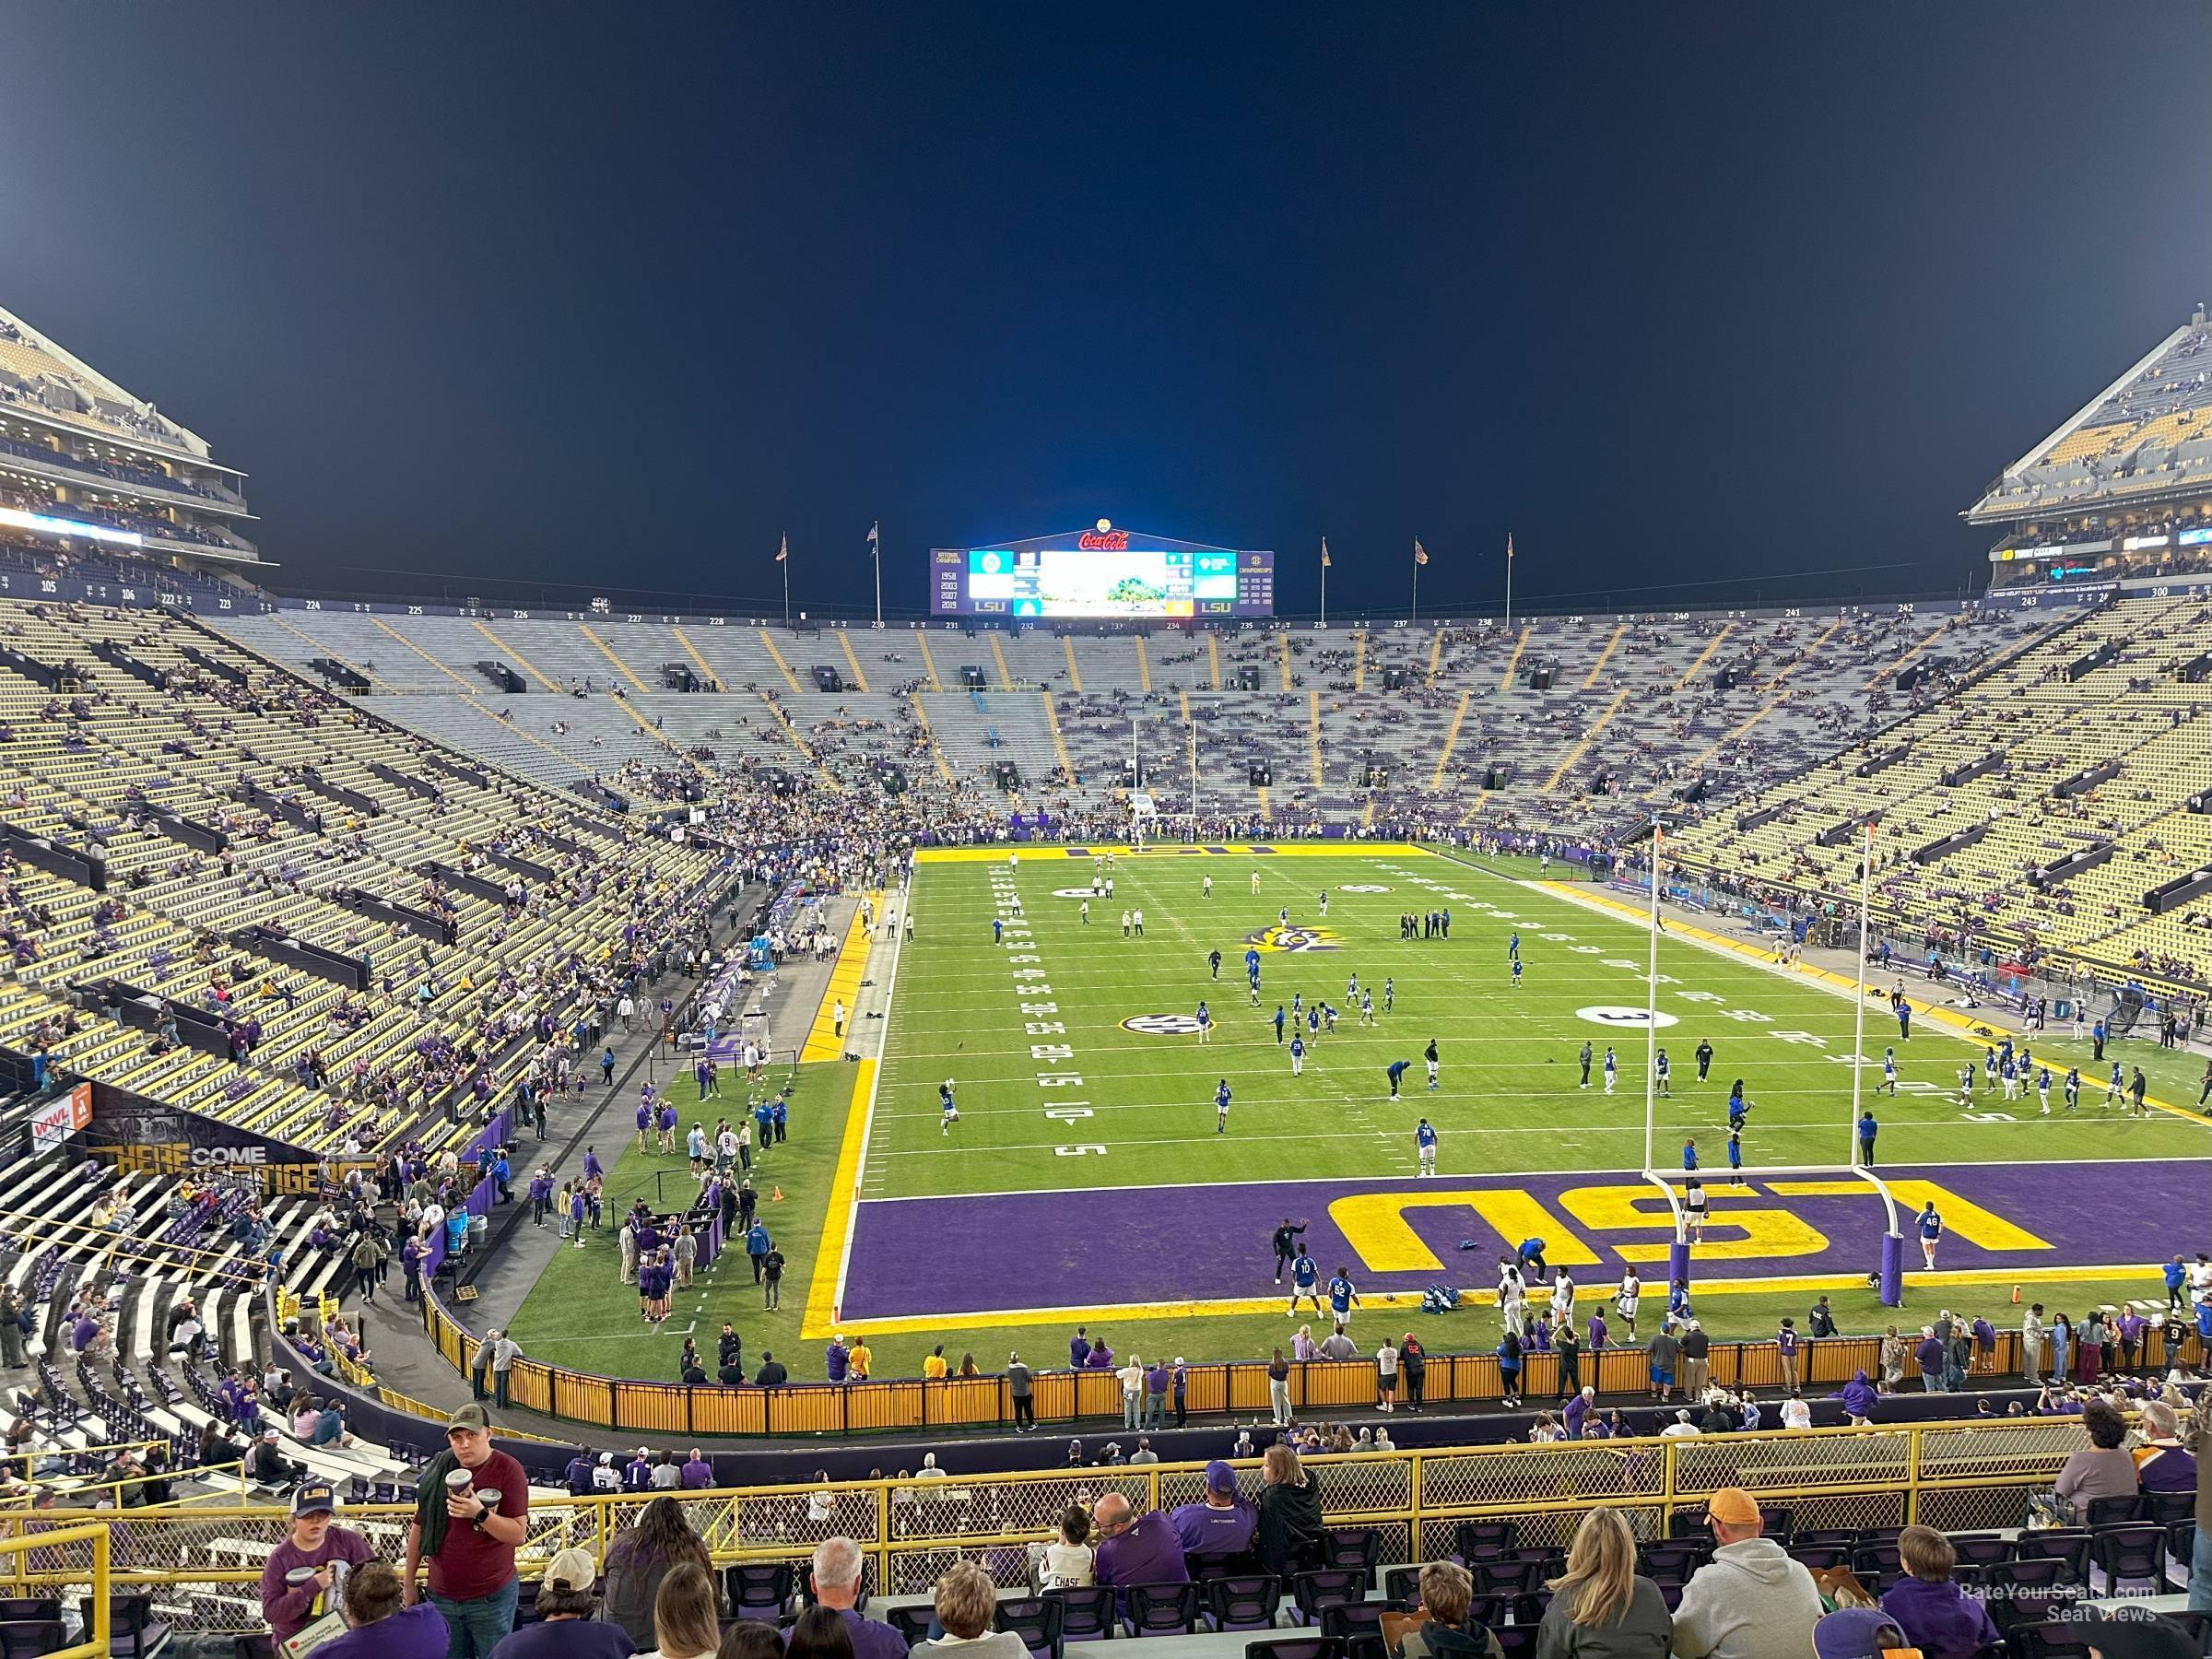 section 418, row 16 seat view  - tiger stadium